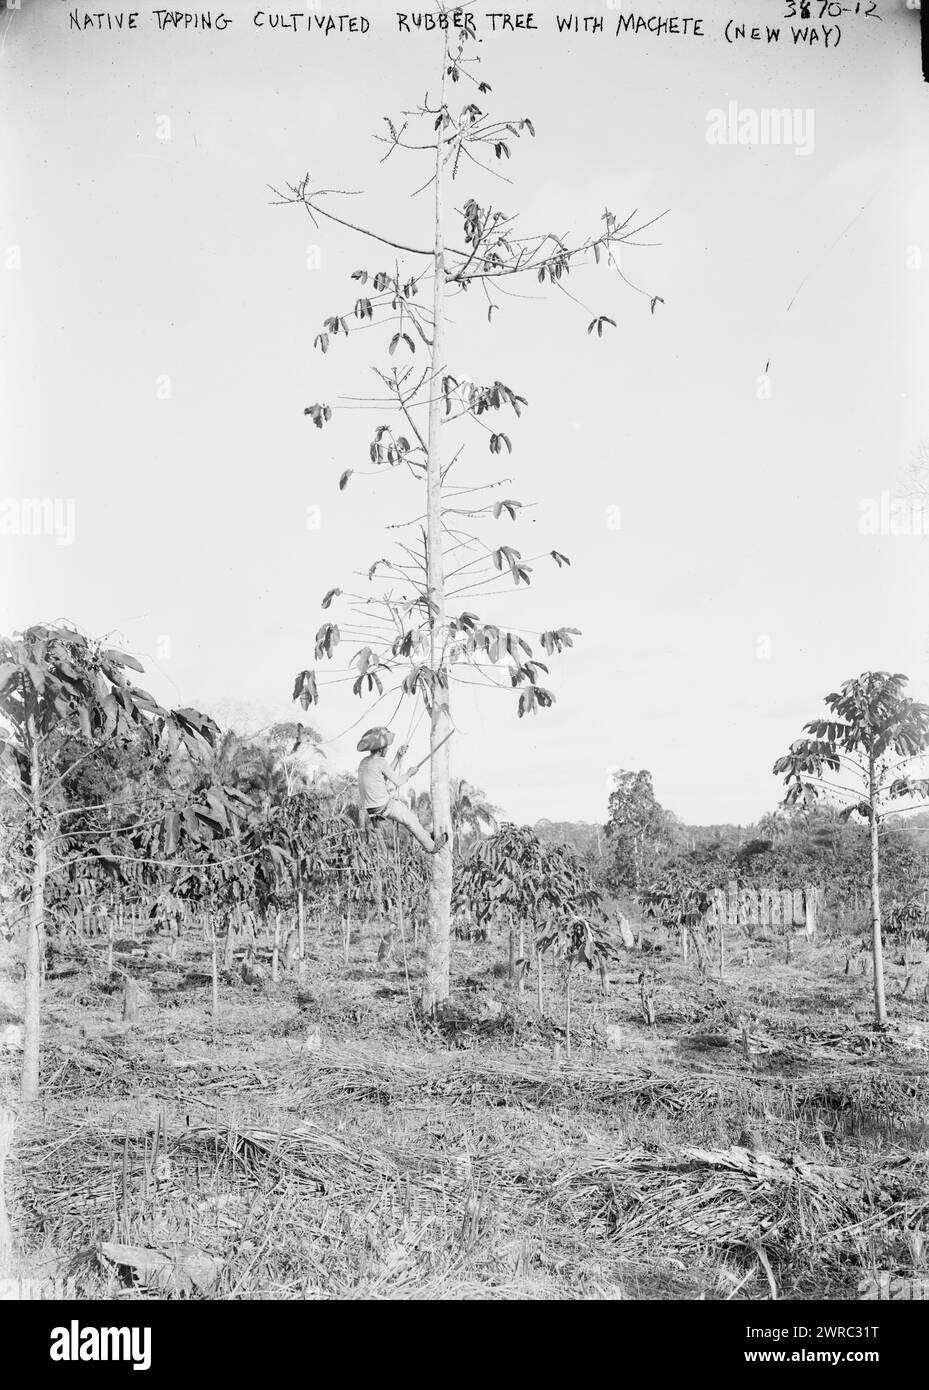 Native tapping Cultivated Rubber Tree with Machete (New Way), between ca. 1915 and ca. 1920, Glass negatives, 1 negative: glass Stock Photo